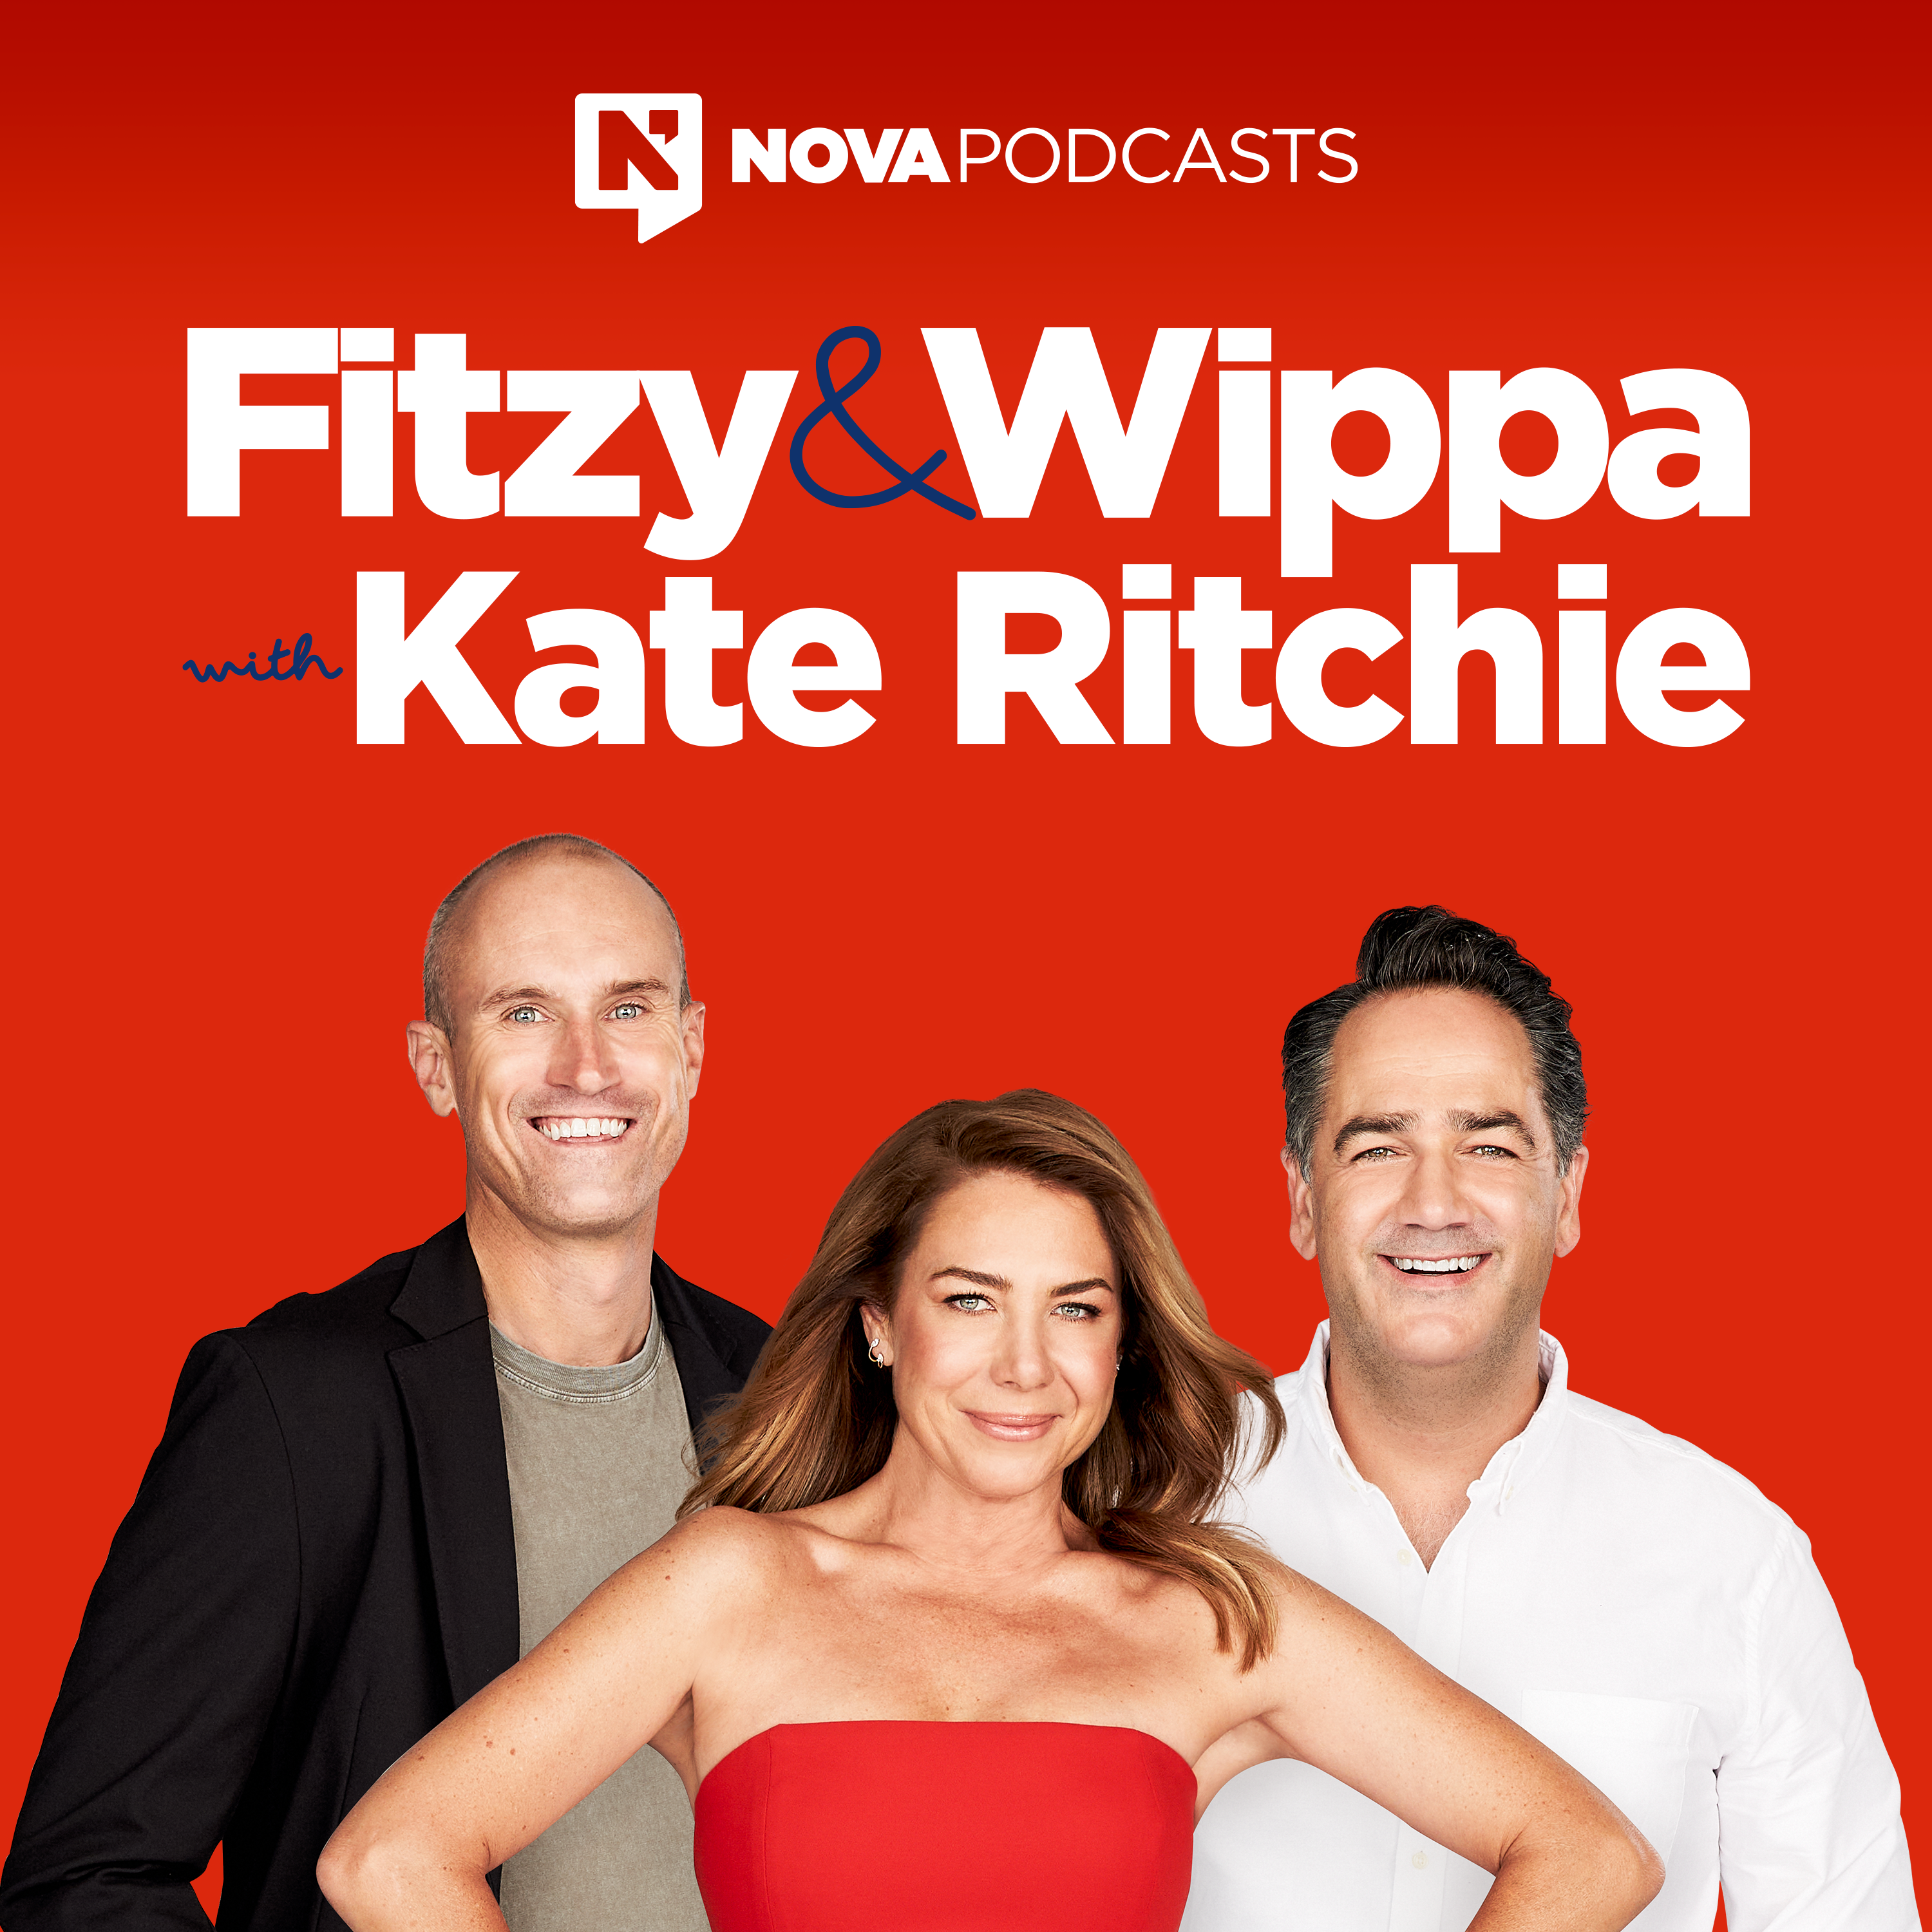 Is This One Of The Best Raps We've EVER Had? (Best Of Fitzy & Wippa)